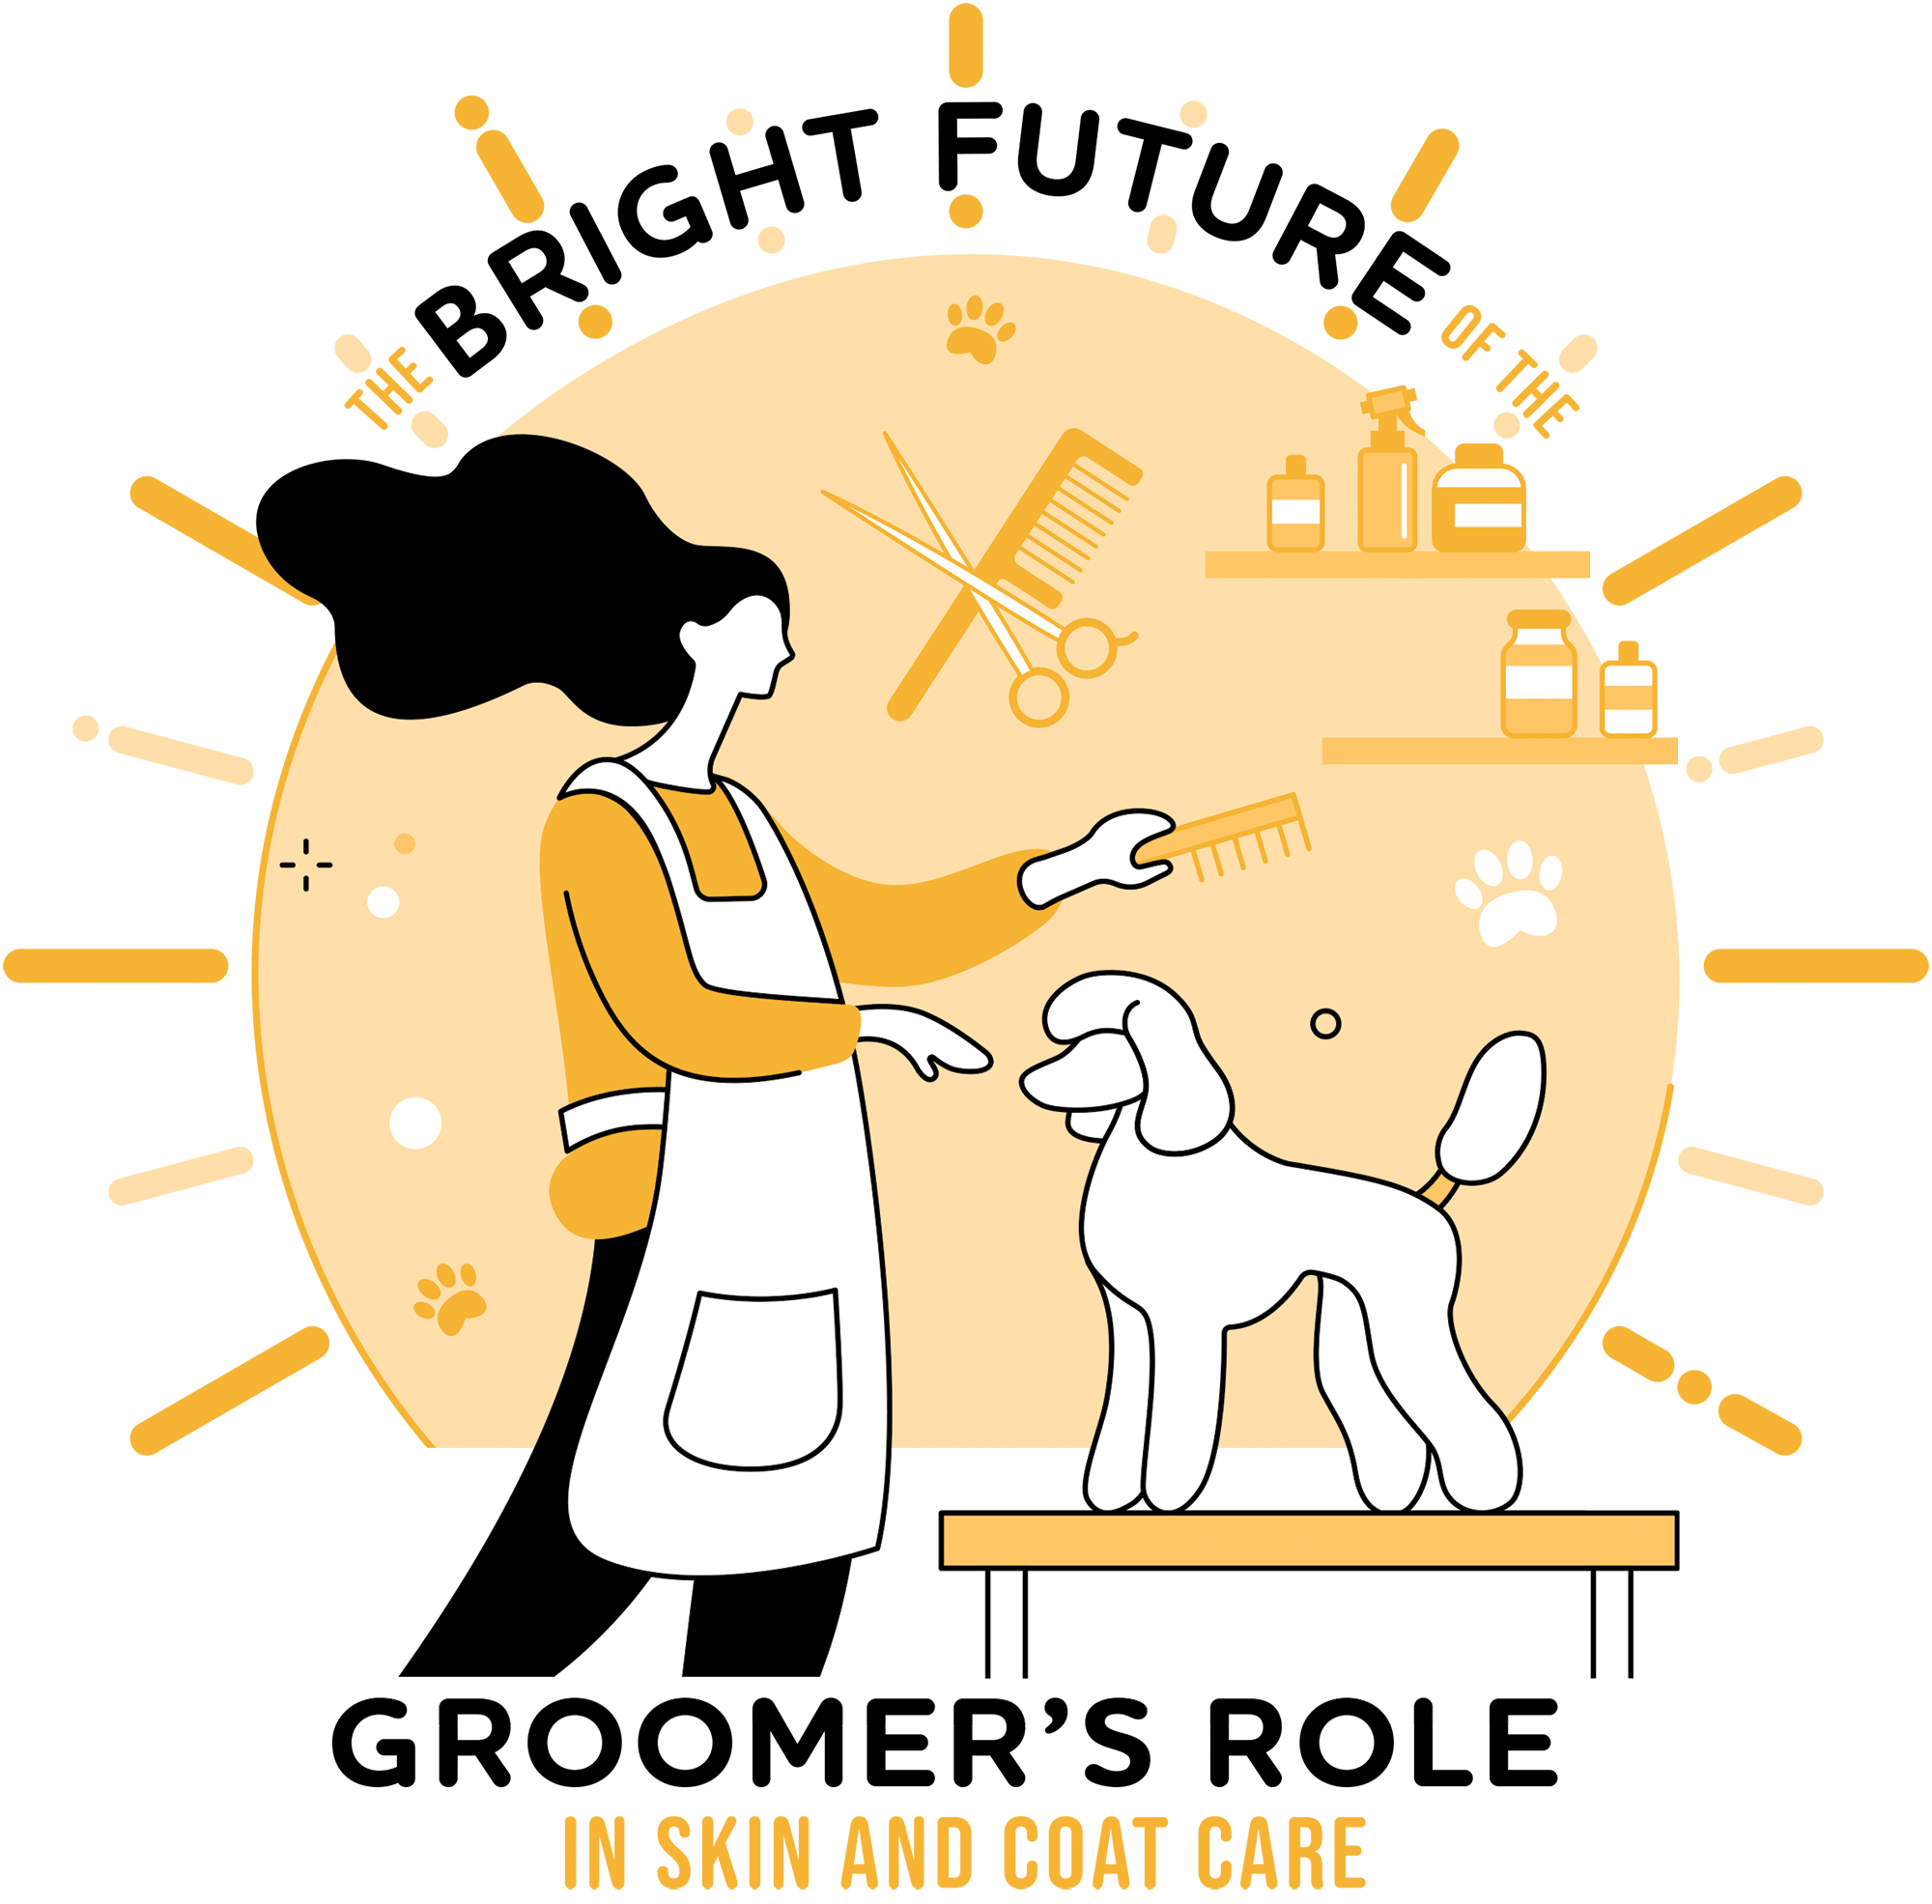 The bright future of the groomer's role in skin and coat care, title illustration of woman in apron brushing a poodle with a comb